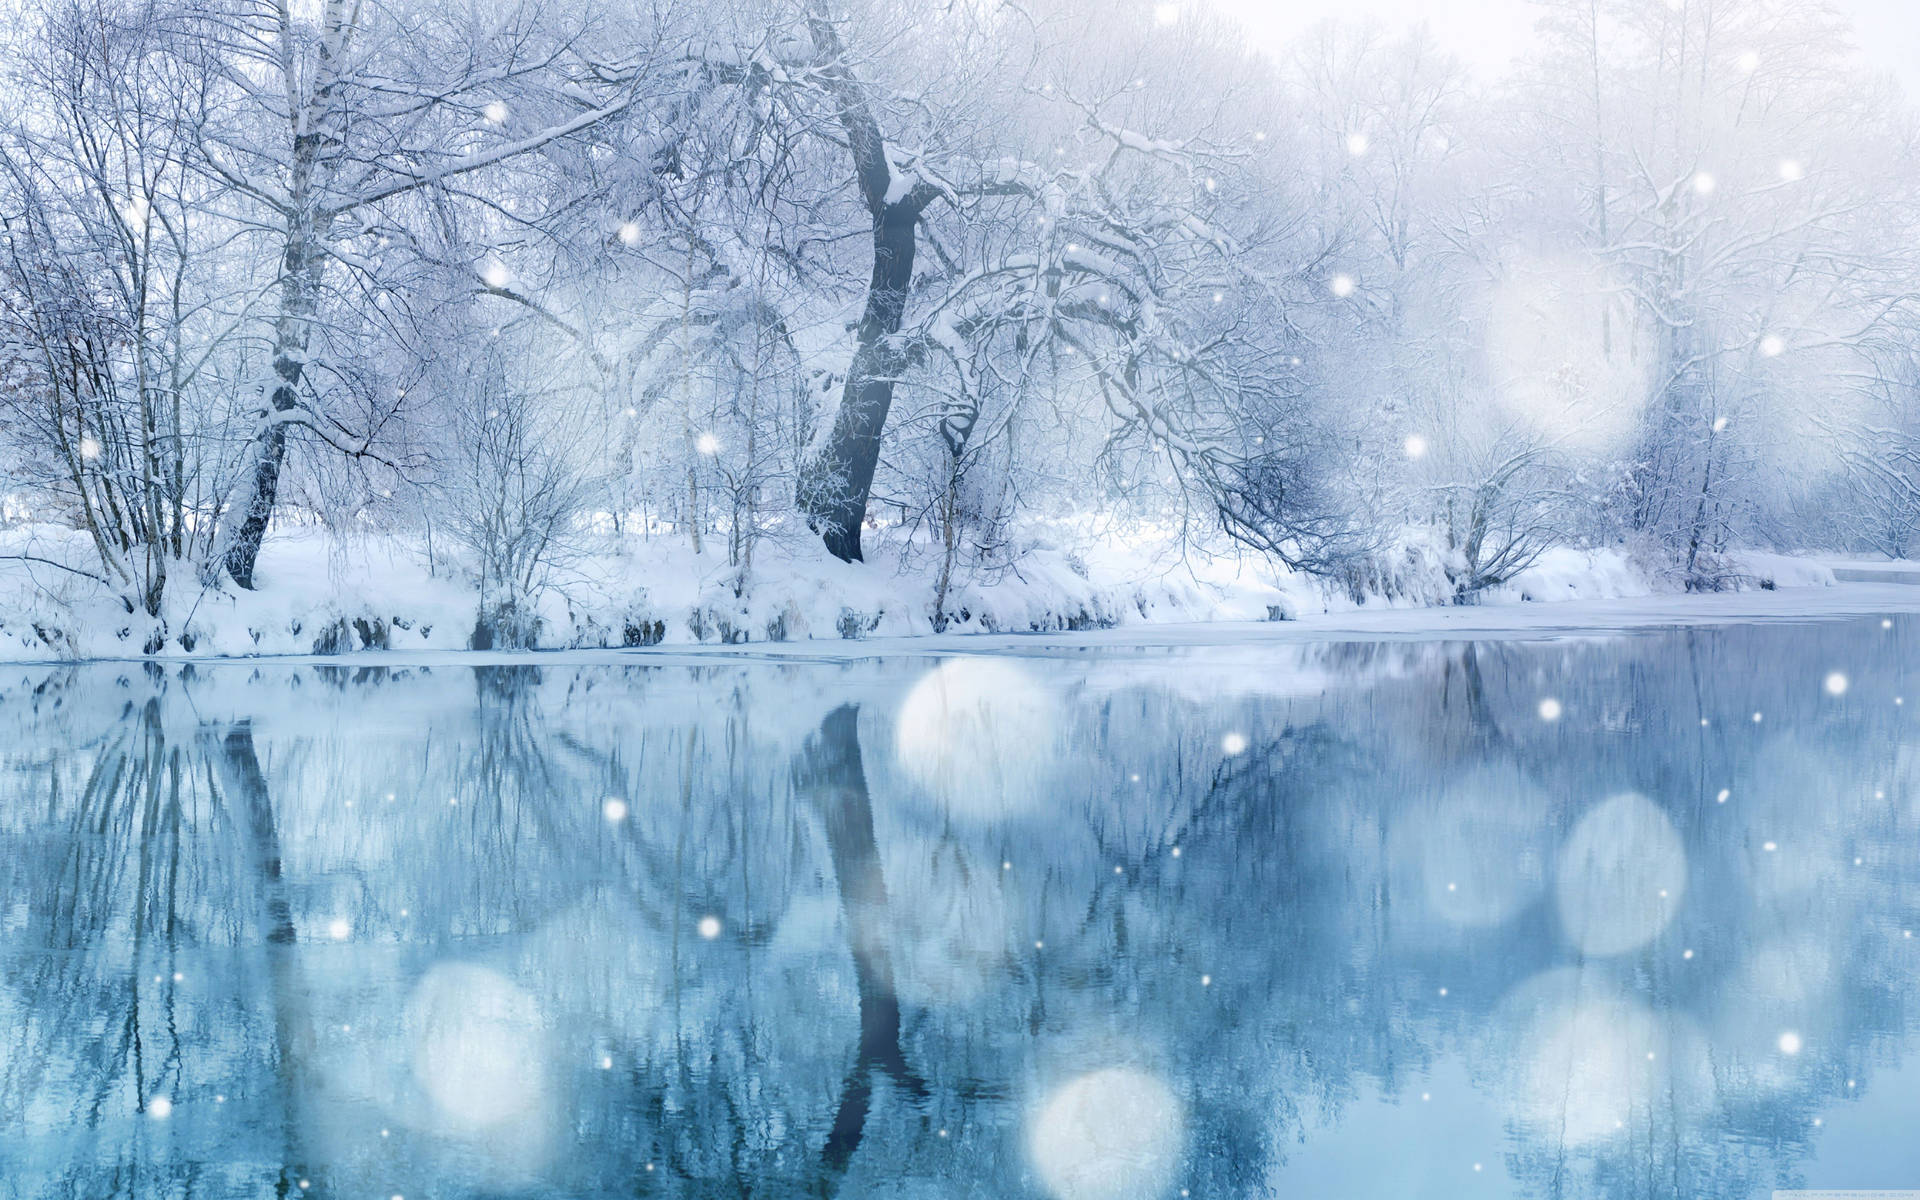 Winter Snowy Trees And Water Background